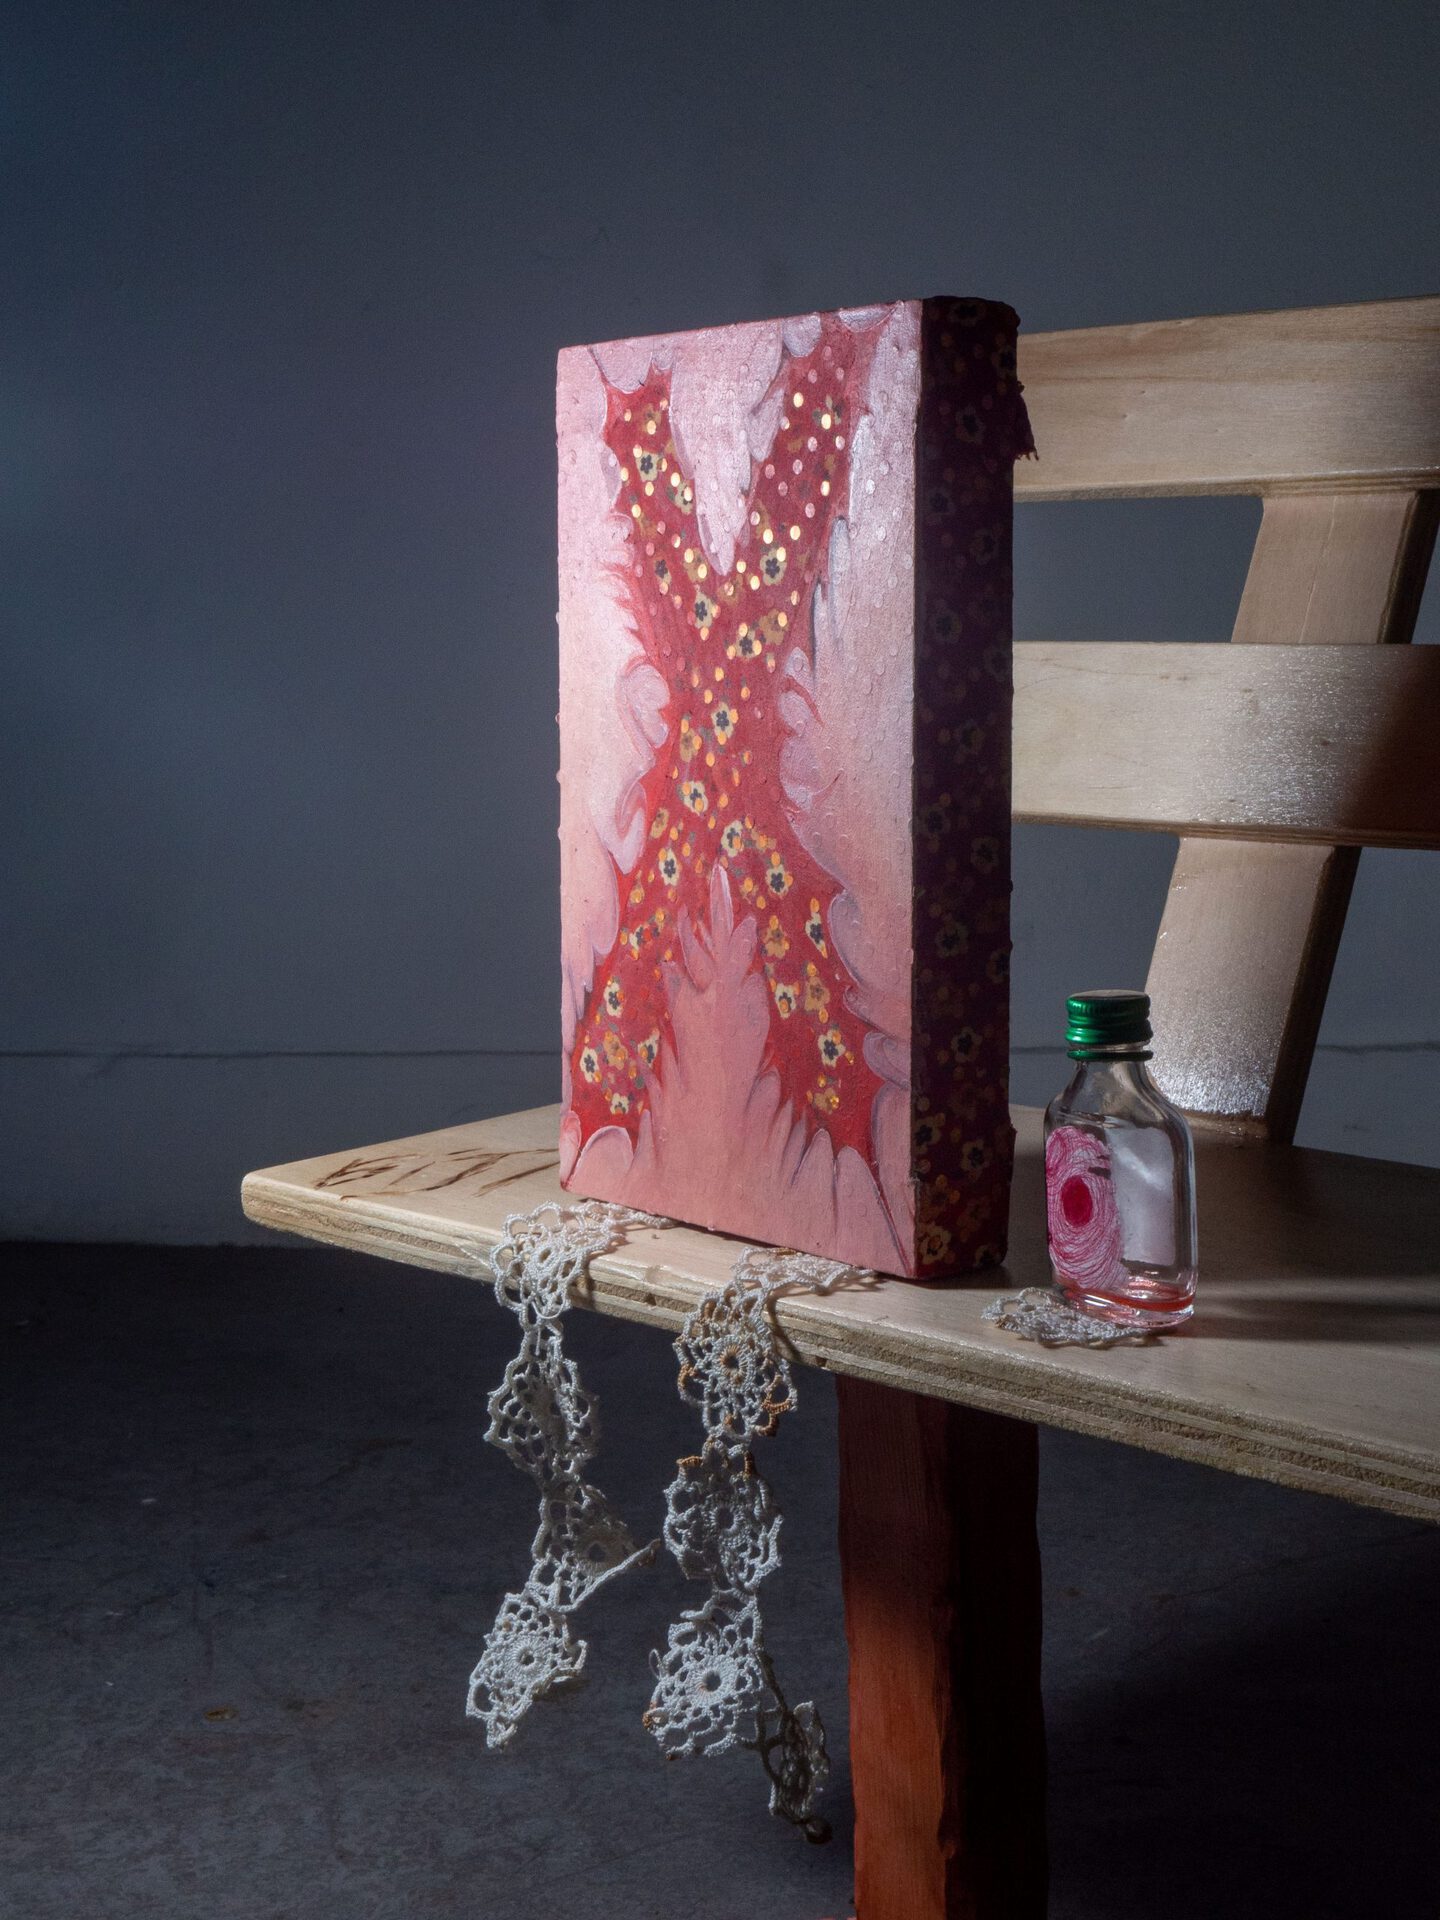 Hatice Pinarbasi - 2022 - Oil on clothes, glitter, lace, alcool bottle, wood, bracelet - 50x100cm